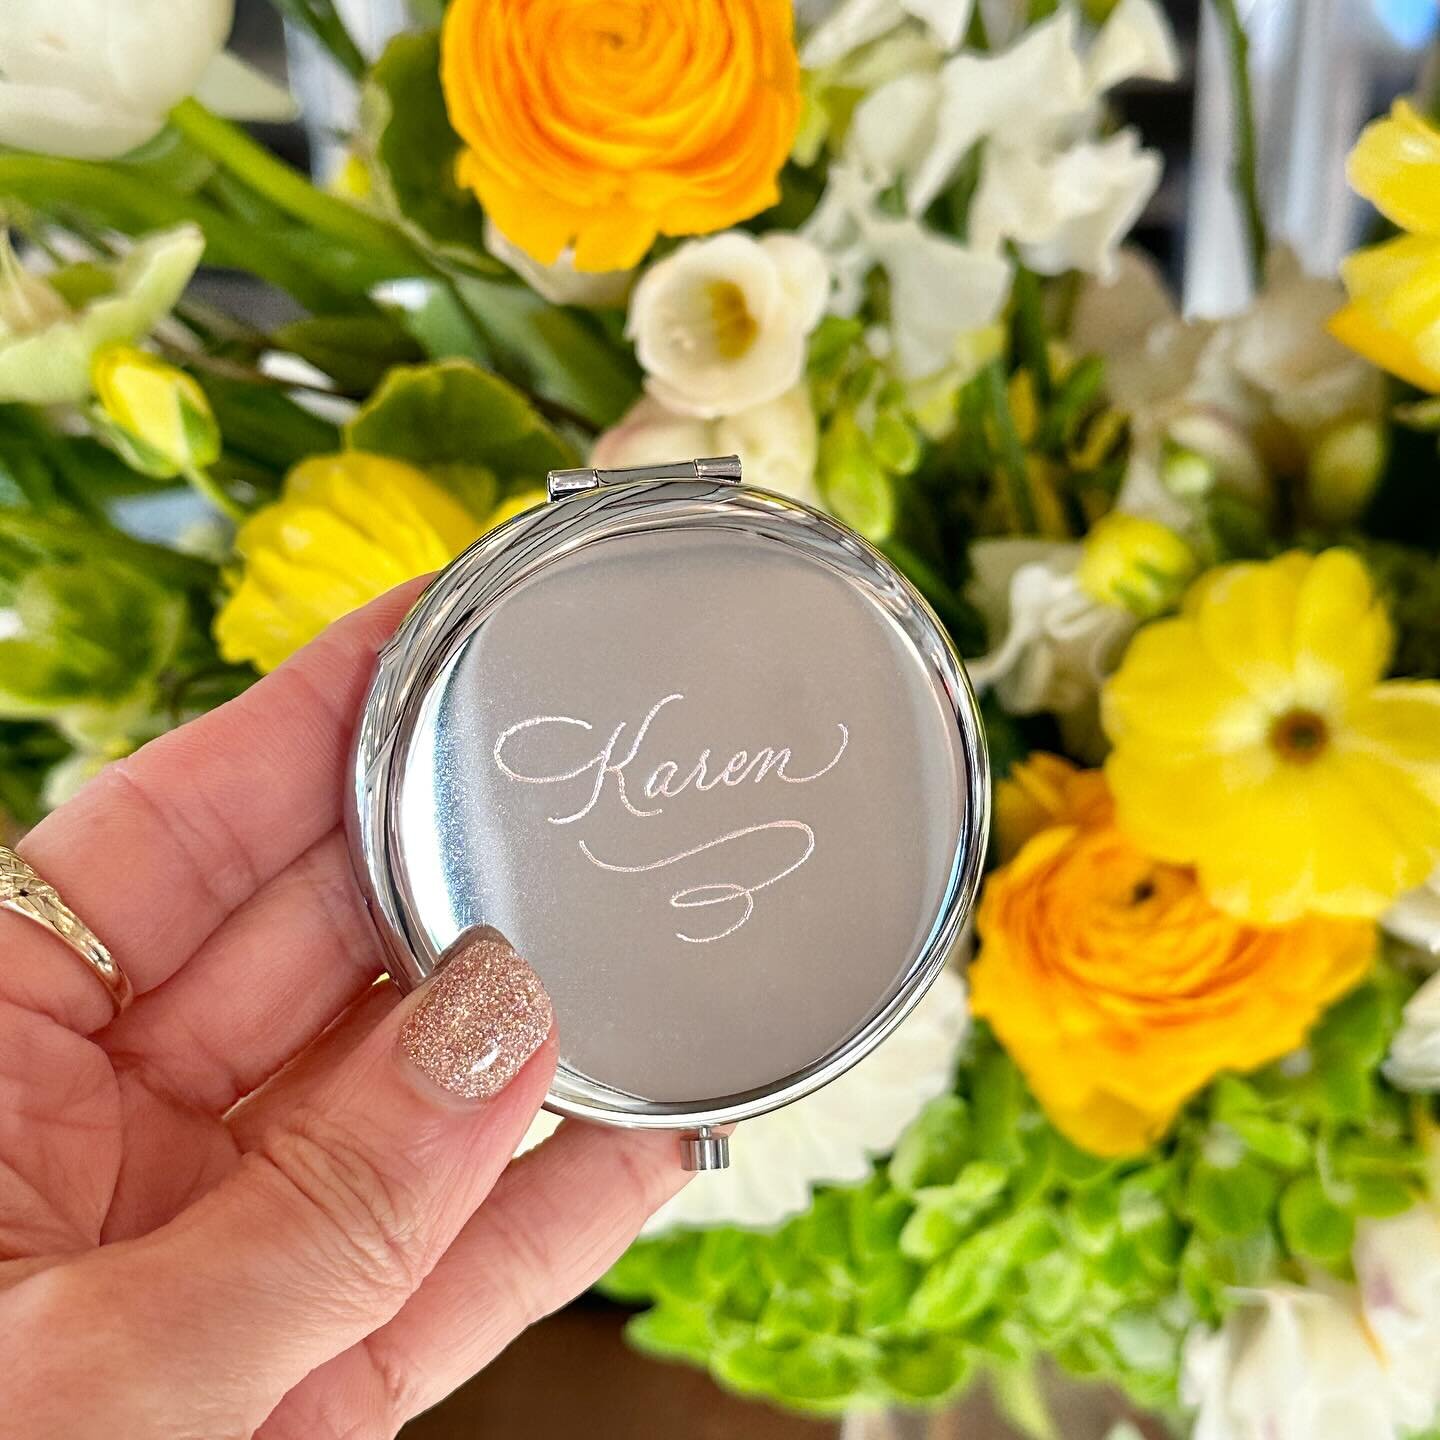 Compact mirror engraving for @supergoop , for the launch event for their new Mineral Unseen Sunscreen, hosted by @iluvsarahii. 

#lacalligrapher #losangelesengraver #losangelescalligrapher #experientialmarketing #brandactivation #productlaunch #super